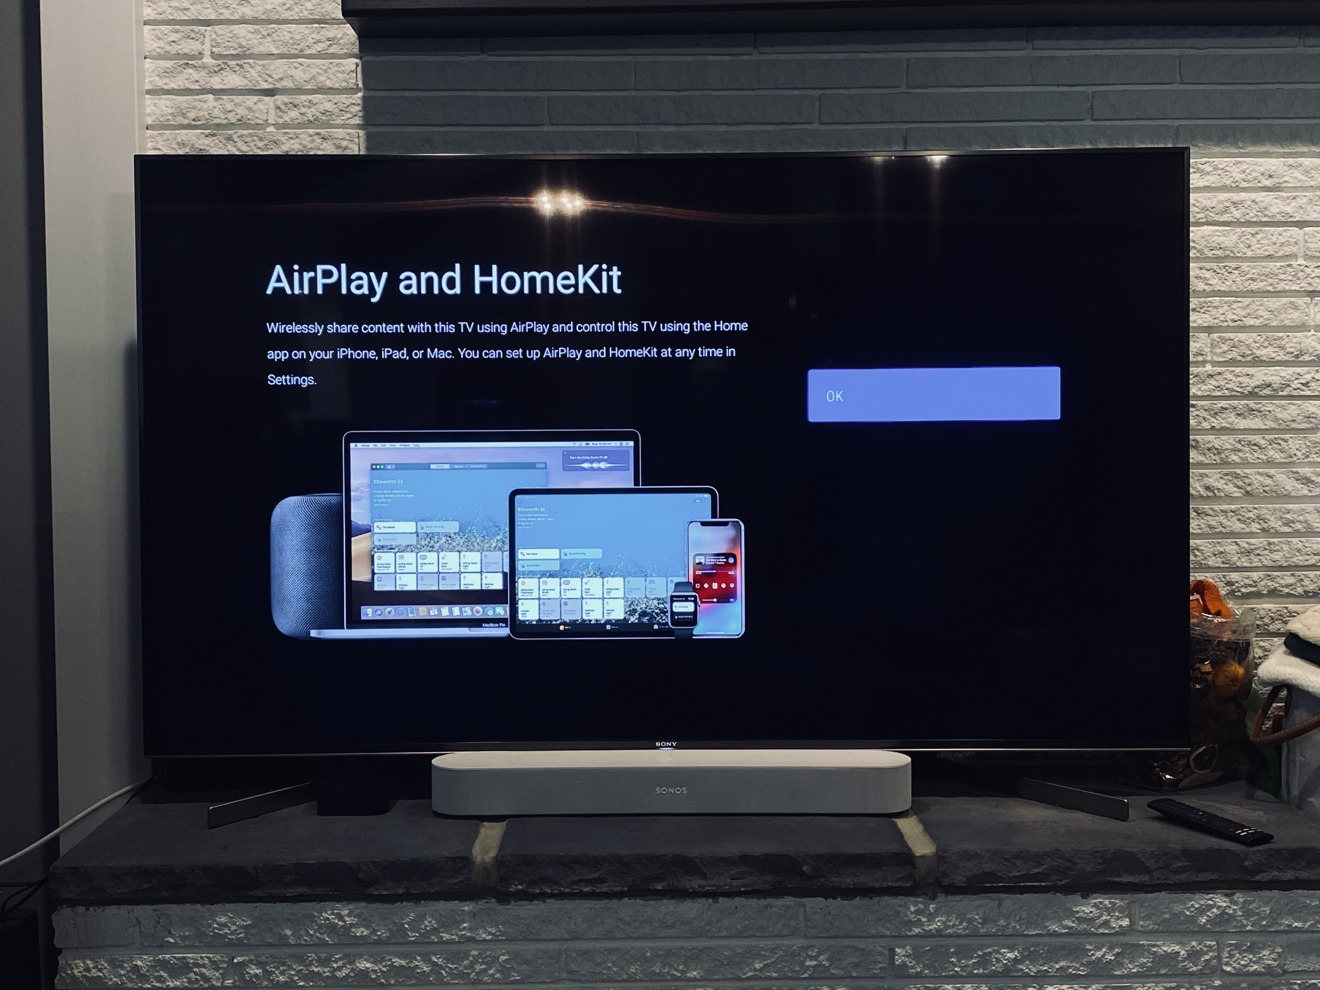 Hot And Airplay 2 On Sony Smart Tvs, Can You Mirror Iphone To Sony Bravia